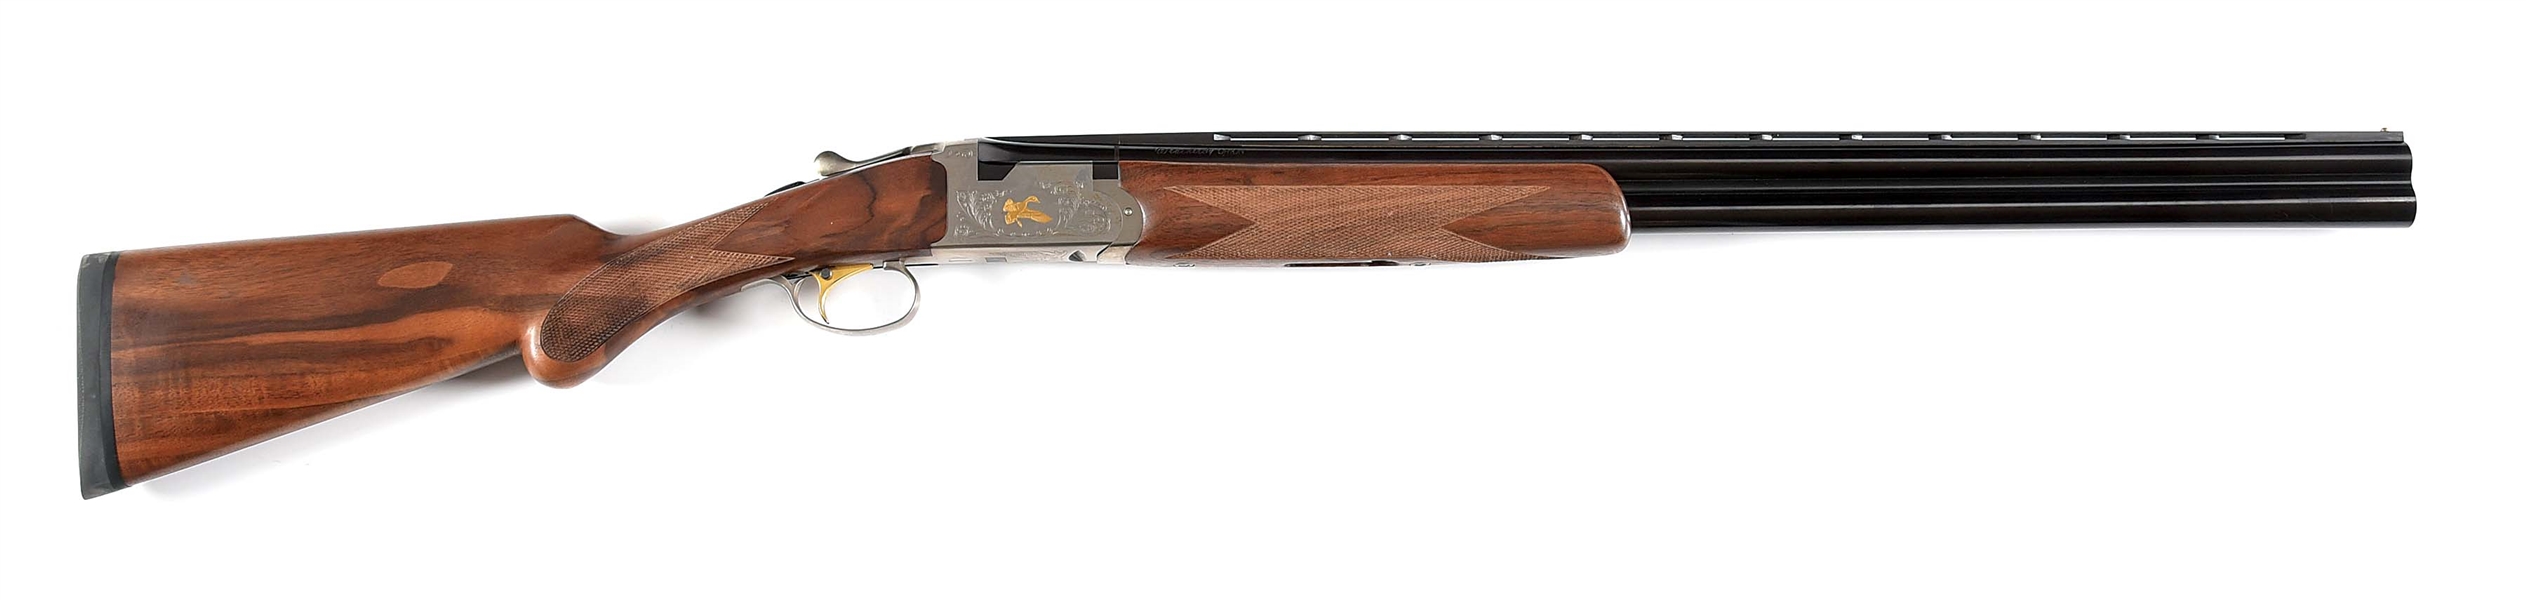 (M) WEATHERBY ORION III CLASSIC FIELD OVER-UNDER SHOTGUN.